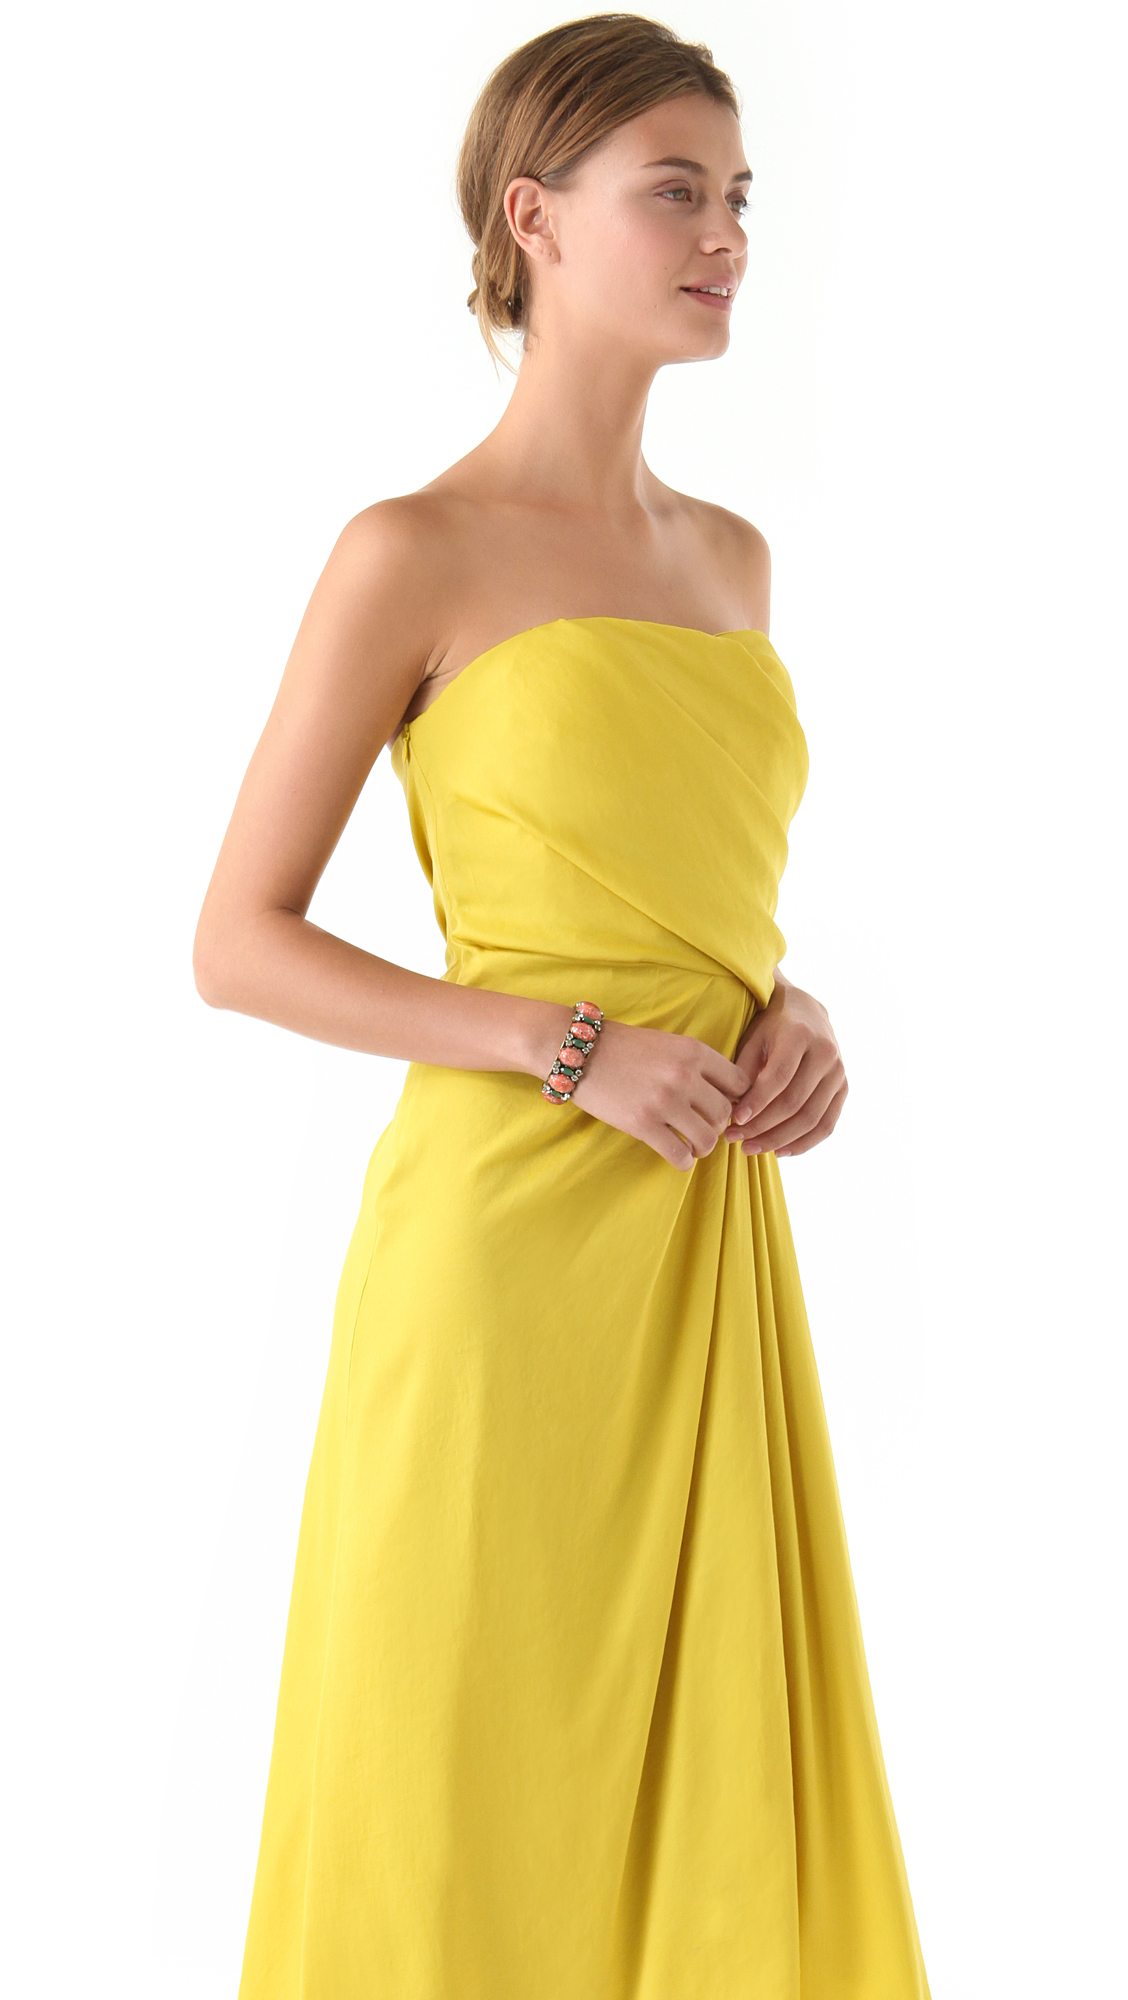 Lyst - Halston Strapless Draped Gown in Yellow